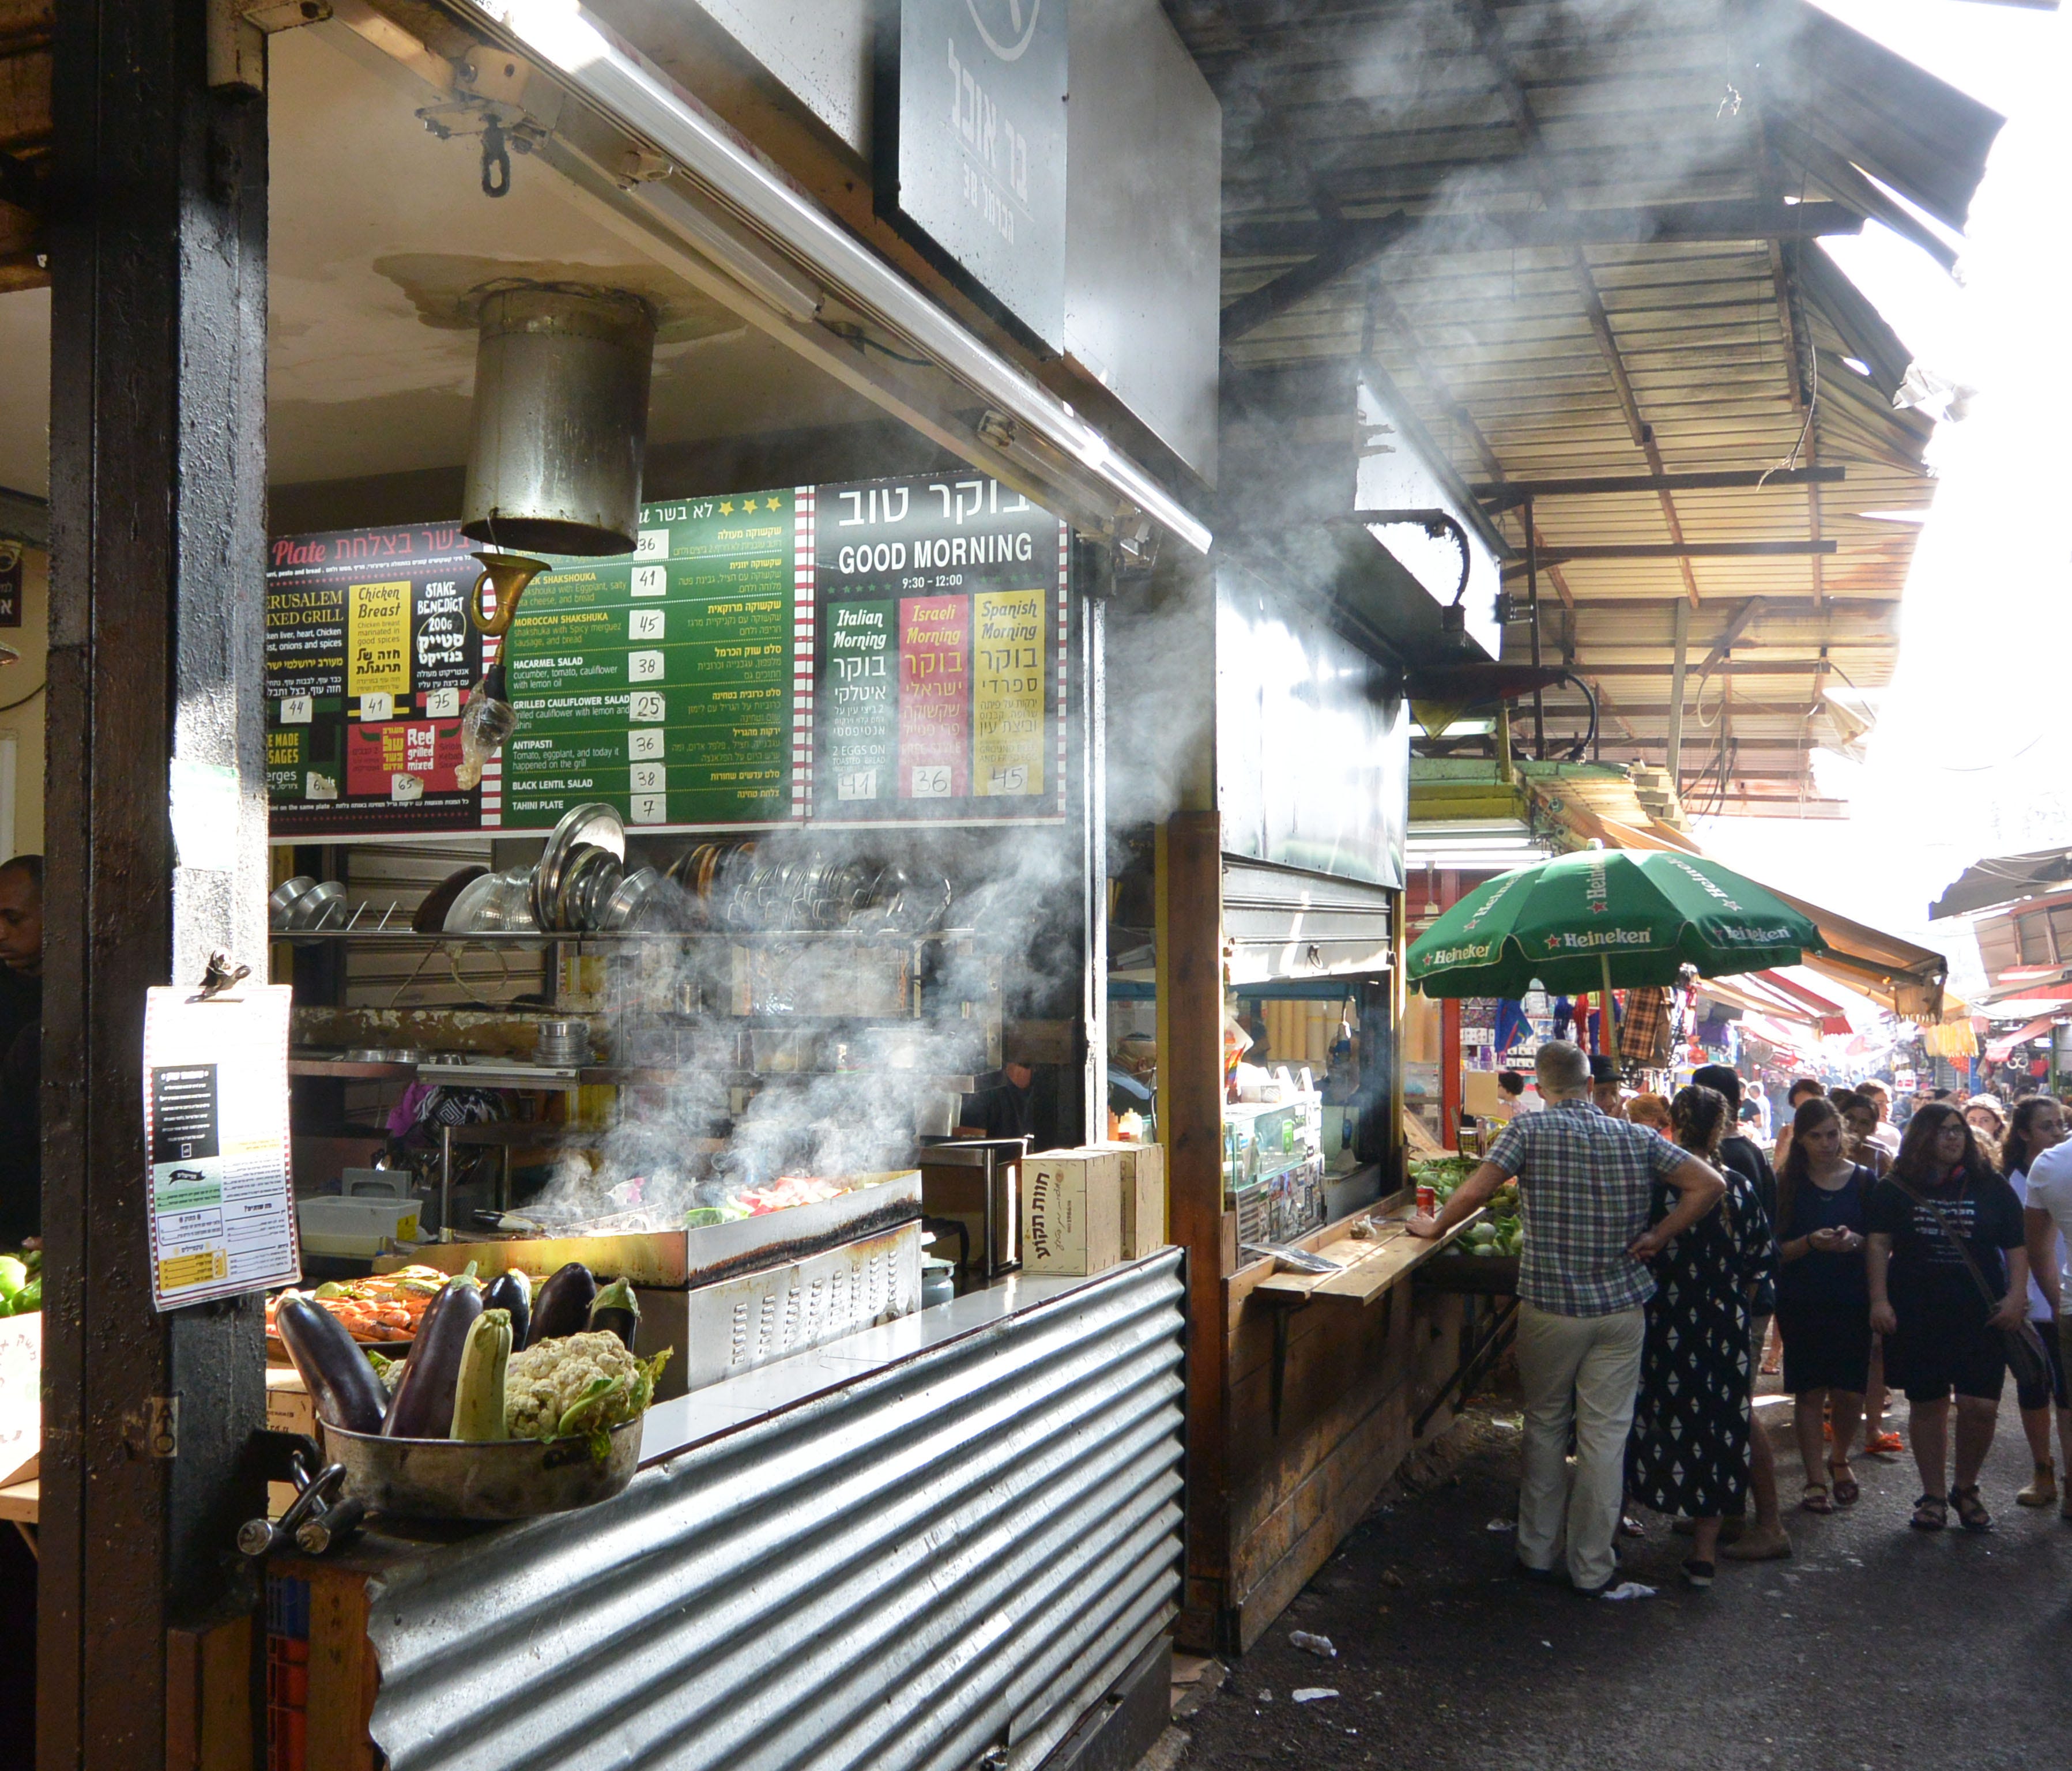 Tiny eateries and hustling kiosks pepper the market, while larger restaurants (mostly svelte cafés with seats spilling onto the streets) pull fresh market flavors and young crowds.